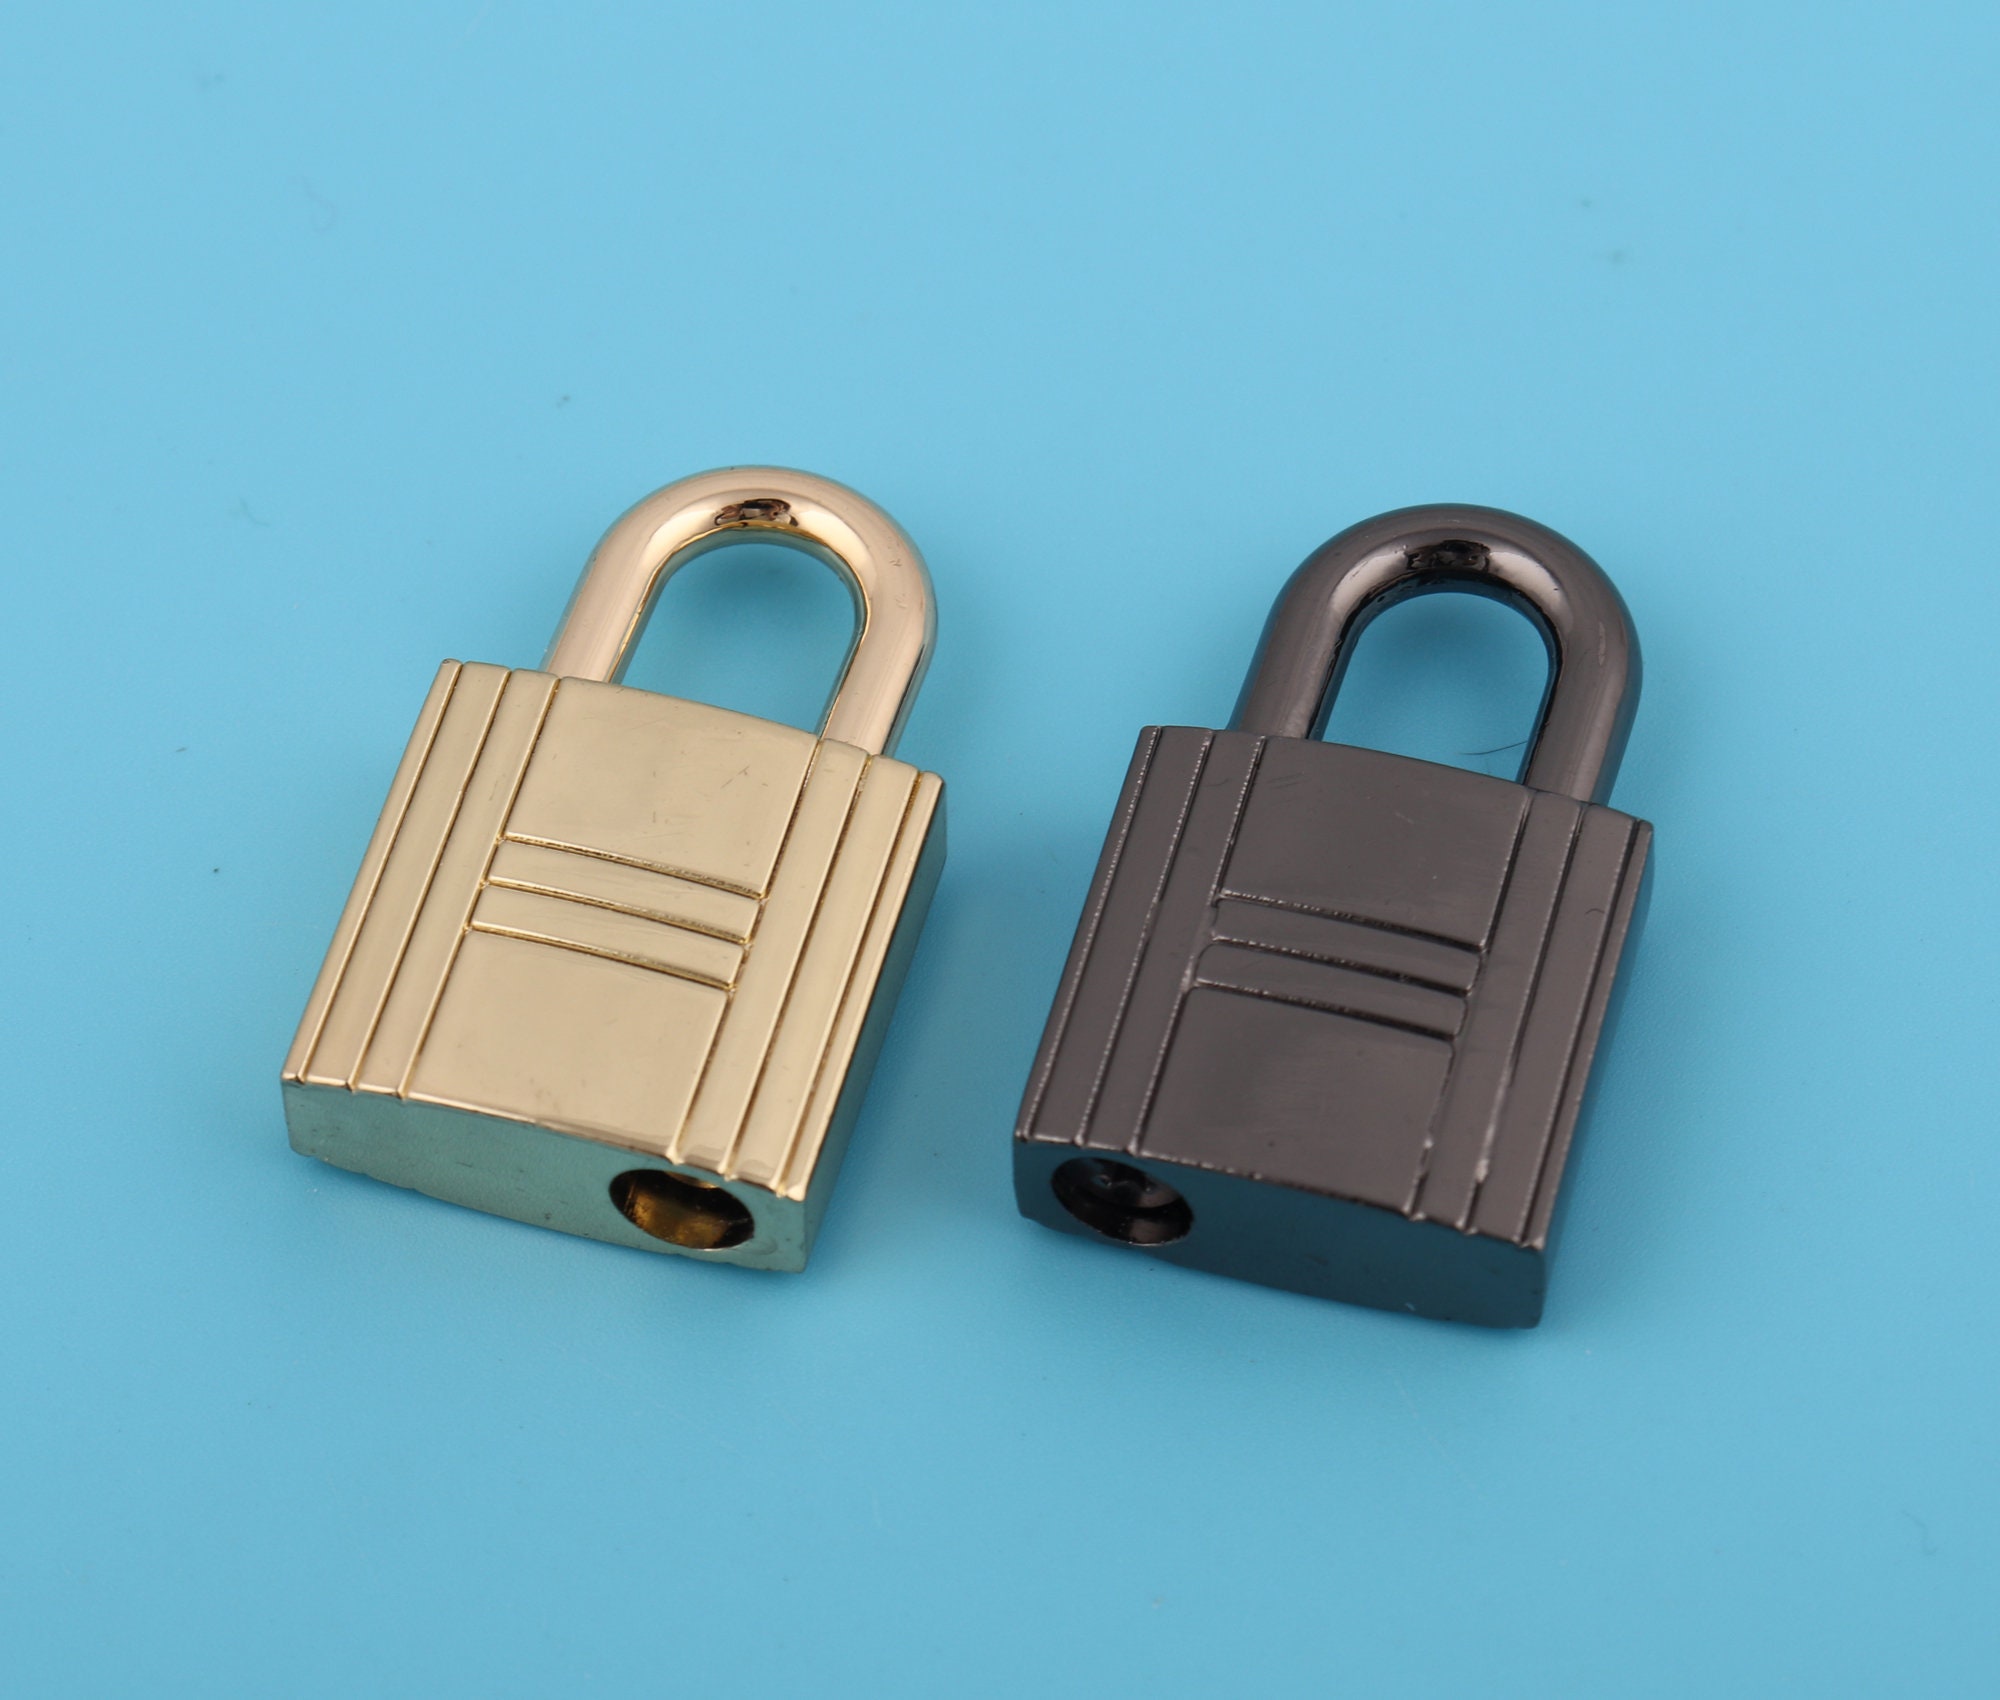 hermes lock products for sale